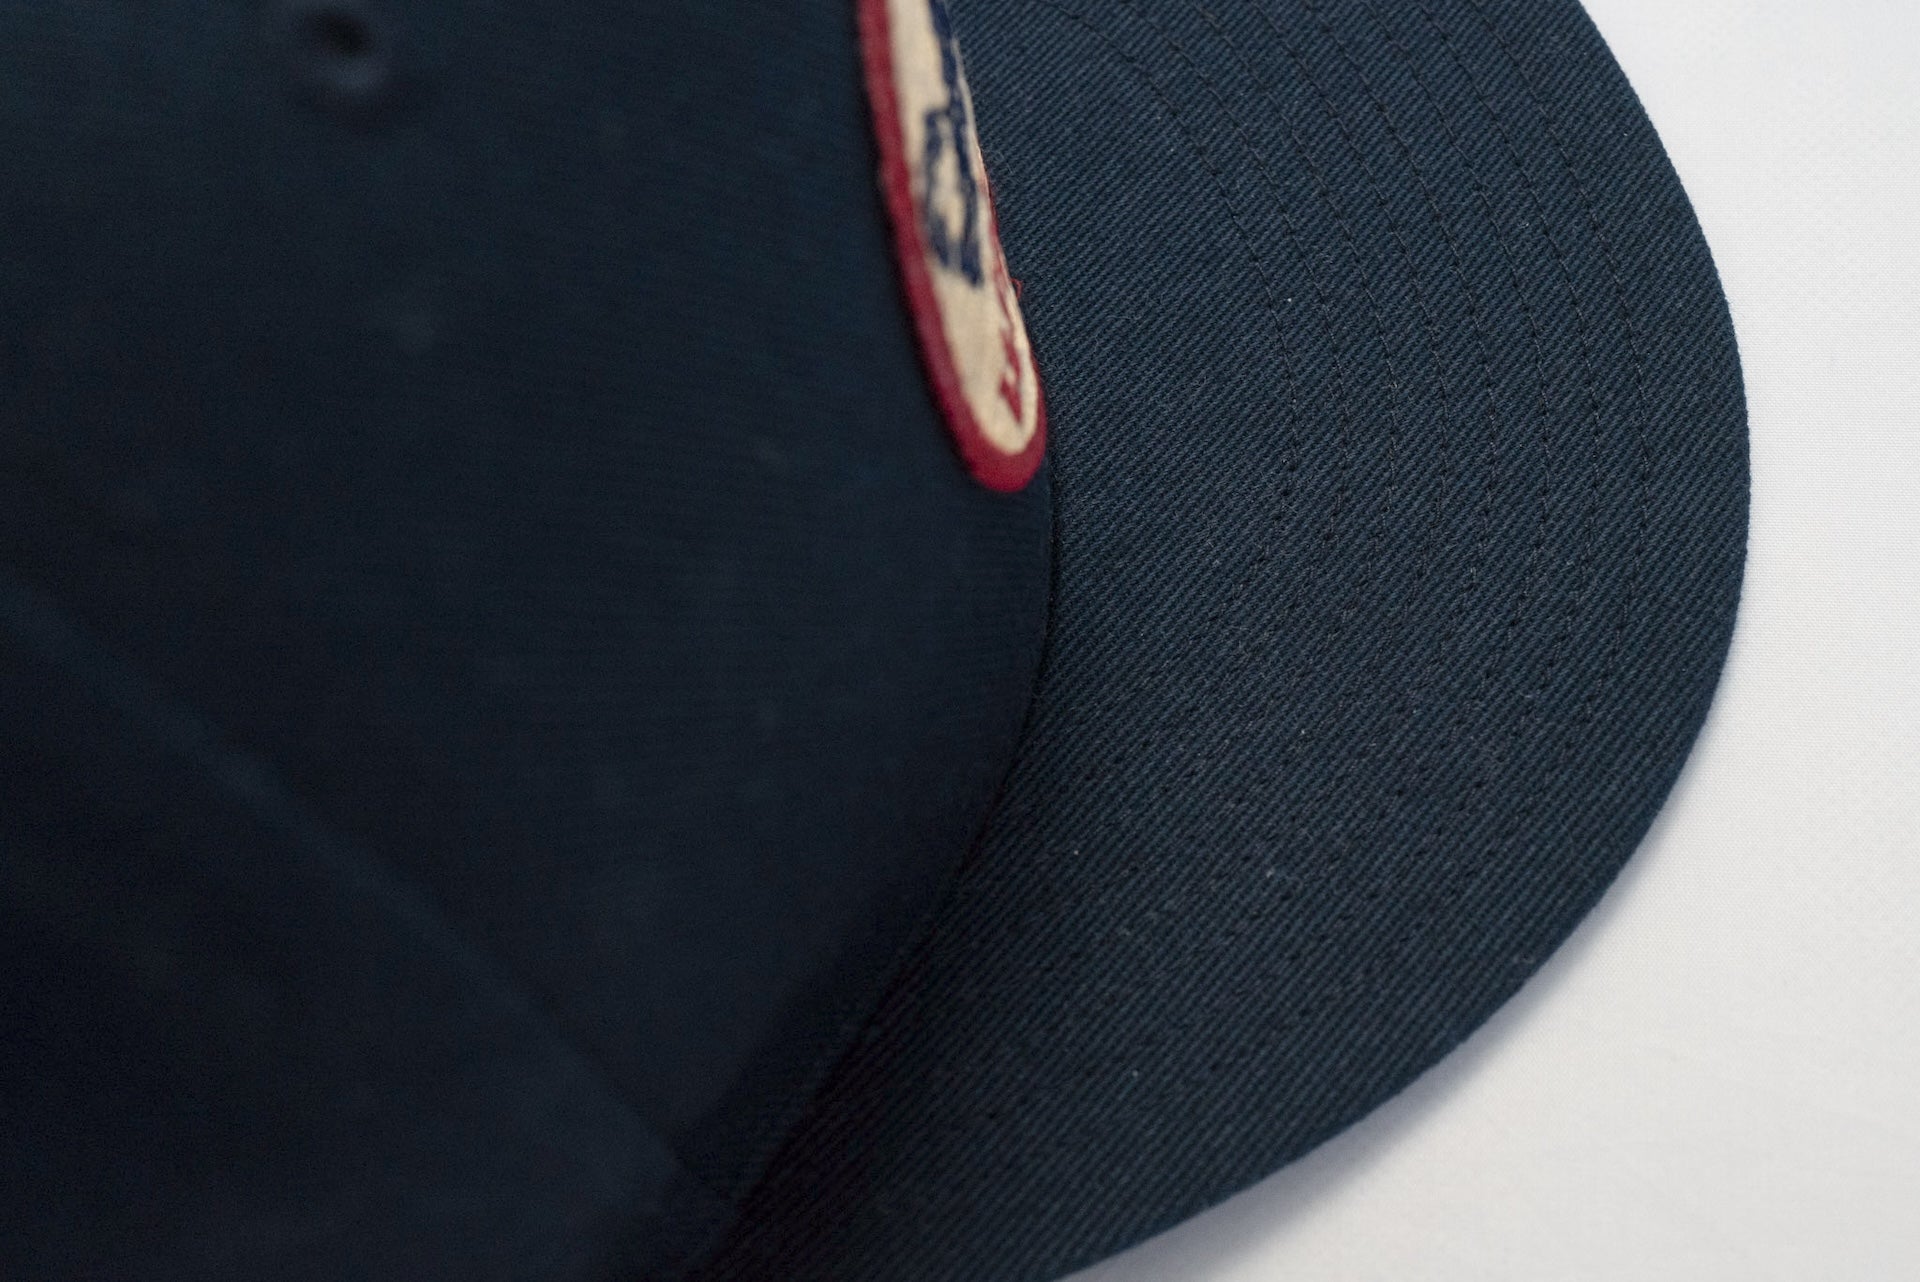 Ultima Thule by Freewheelers "Ancient Monster" Crest Vent Cap (Navy)